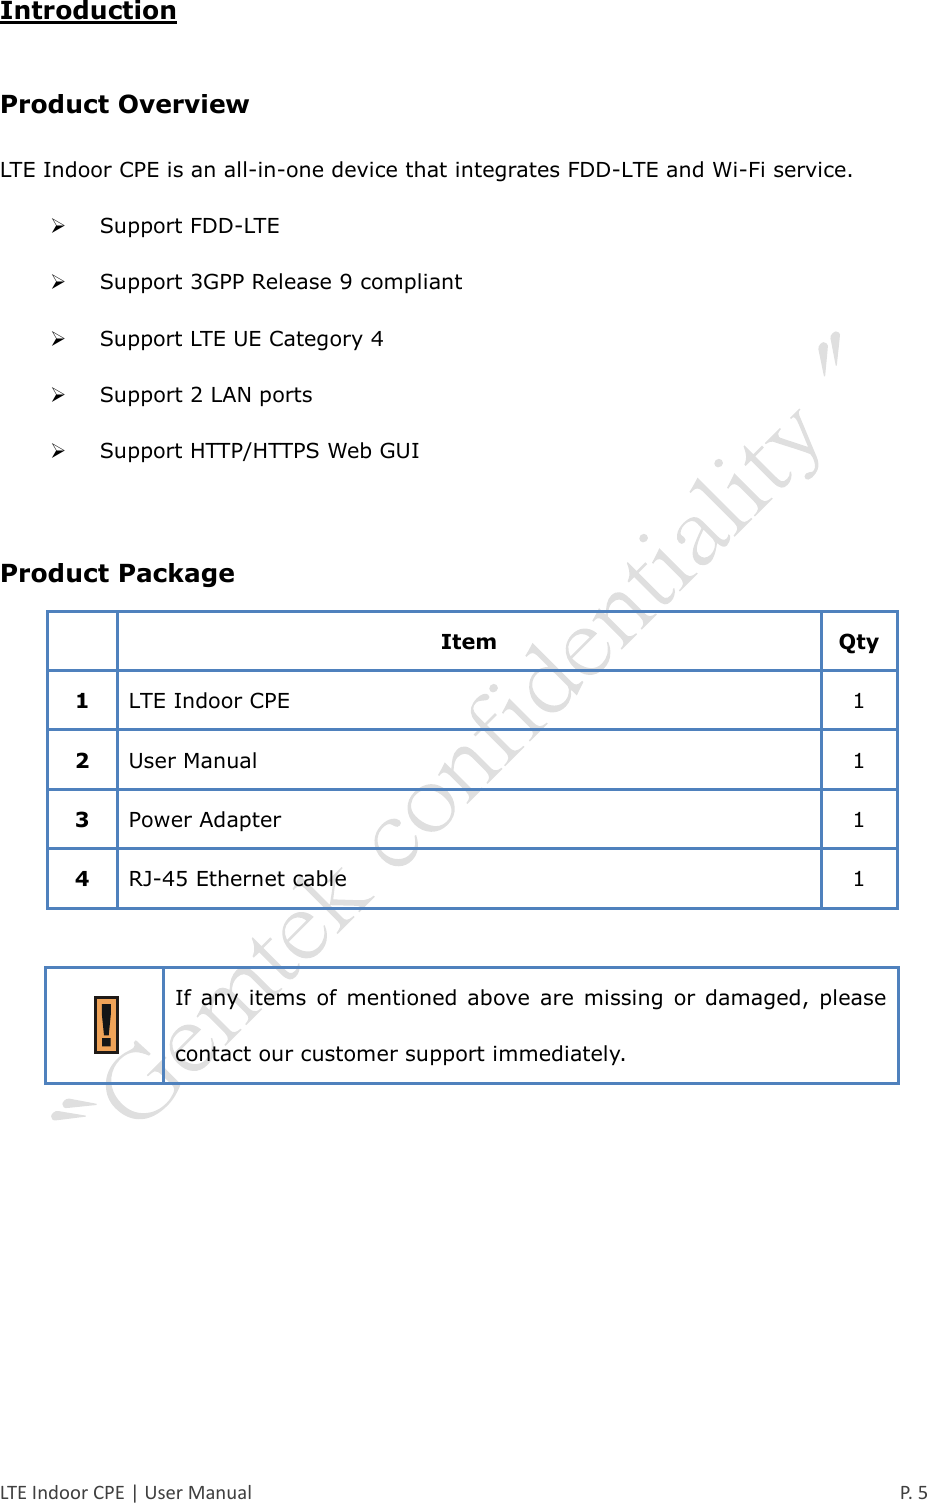  LTE Indoor CPE | User Manual      P. 5 Introduction Product Overview LTE Indoor CPE is an all-in-one device that integrates FDD-LTE and Wi-Fi service.  Support FDD-LTE  Support 3GPP Release 9 compliant  Support LTE UE Category 4  Support 2 LAN ports  Support HTTP/HTTPS Web GUI  Product Package  Item Qty 1 LTE Indoor CPE 1 2 User Manual 1 3 Power Adapter 1 4 RJ-45 Ethernet cable 1   If  any  items  of  mentioned  above  are  missing  or  damaged,  please contact our customer support immediately.     